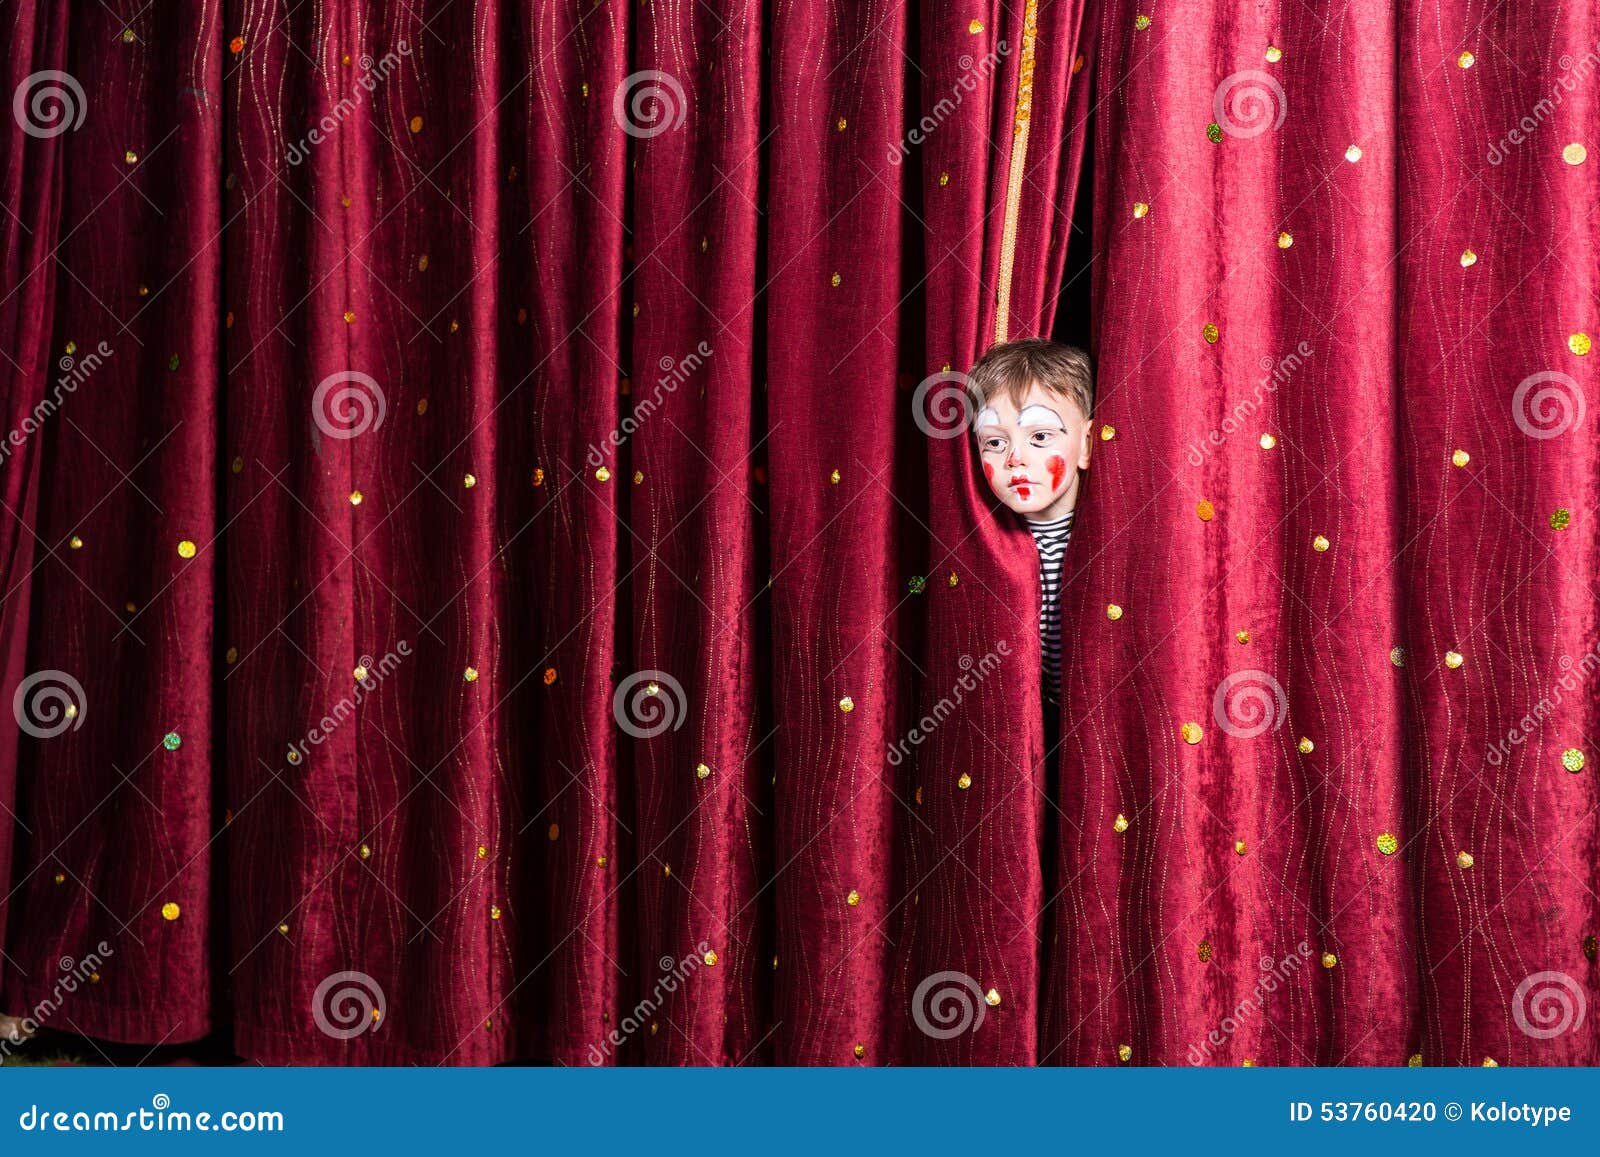 Little Boy in Makeup Waiting for His Acting Cue Stock Photo - Image of ...